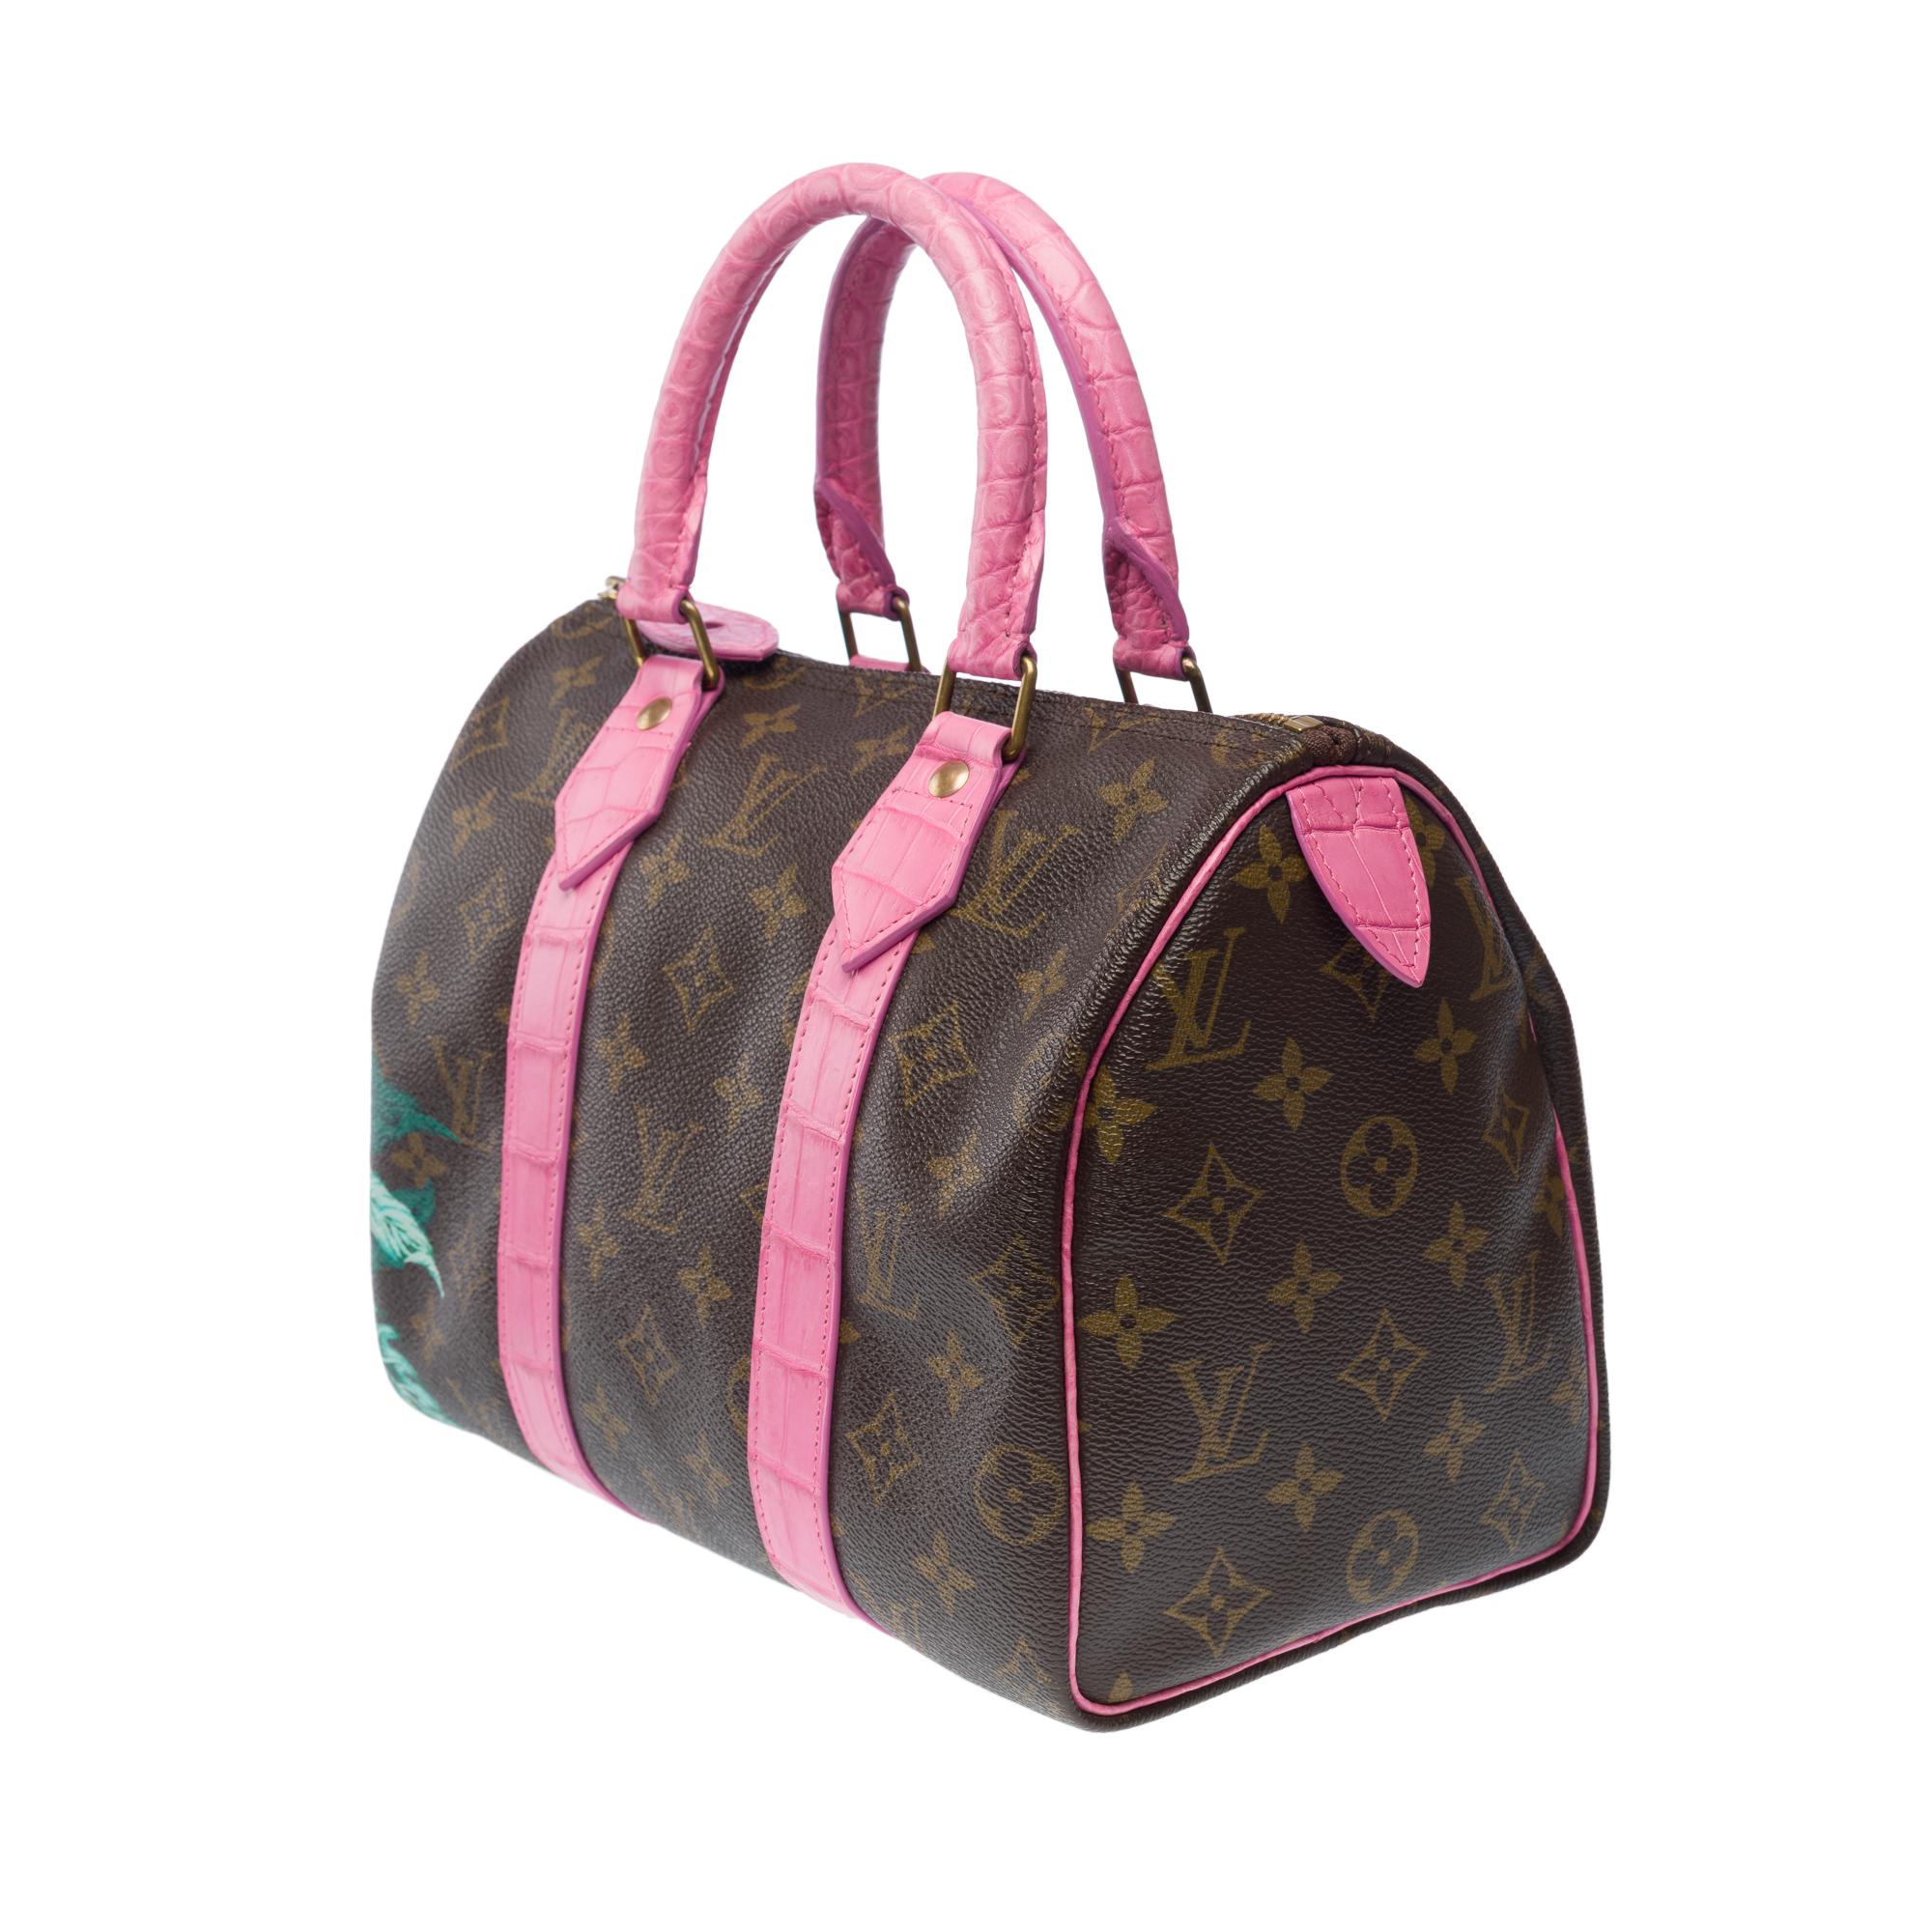 Customized Louis Vuitton Speedy 25 handbag Flowers with Pink Crocodile leather For Sale 2